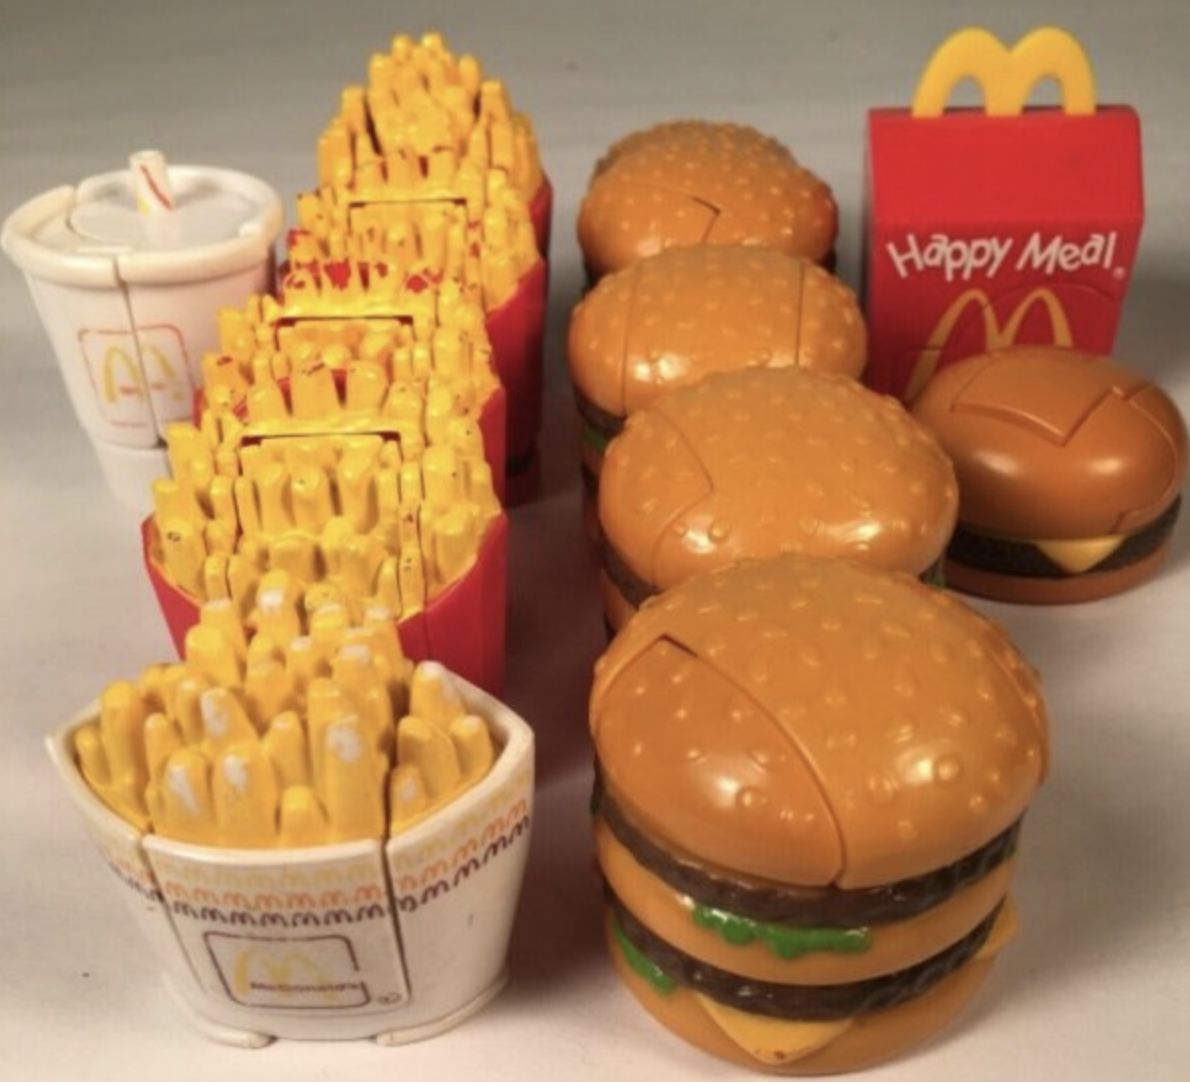 Toy fries and burgers